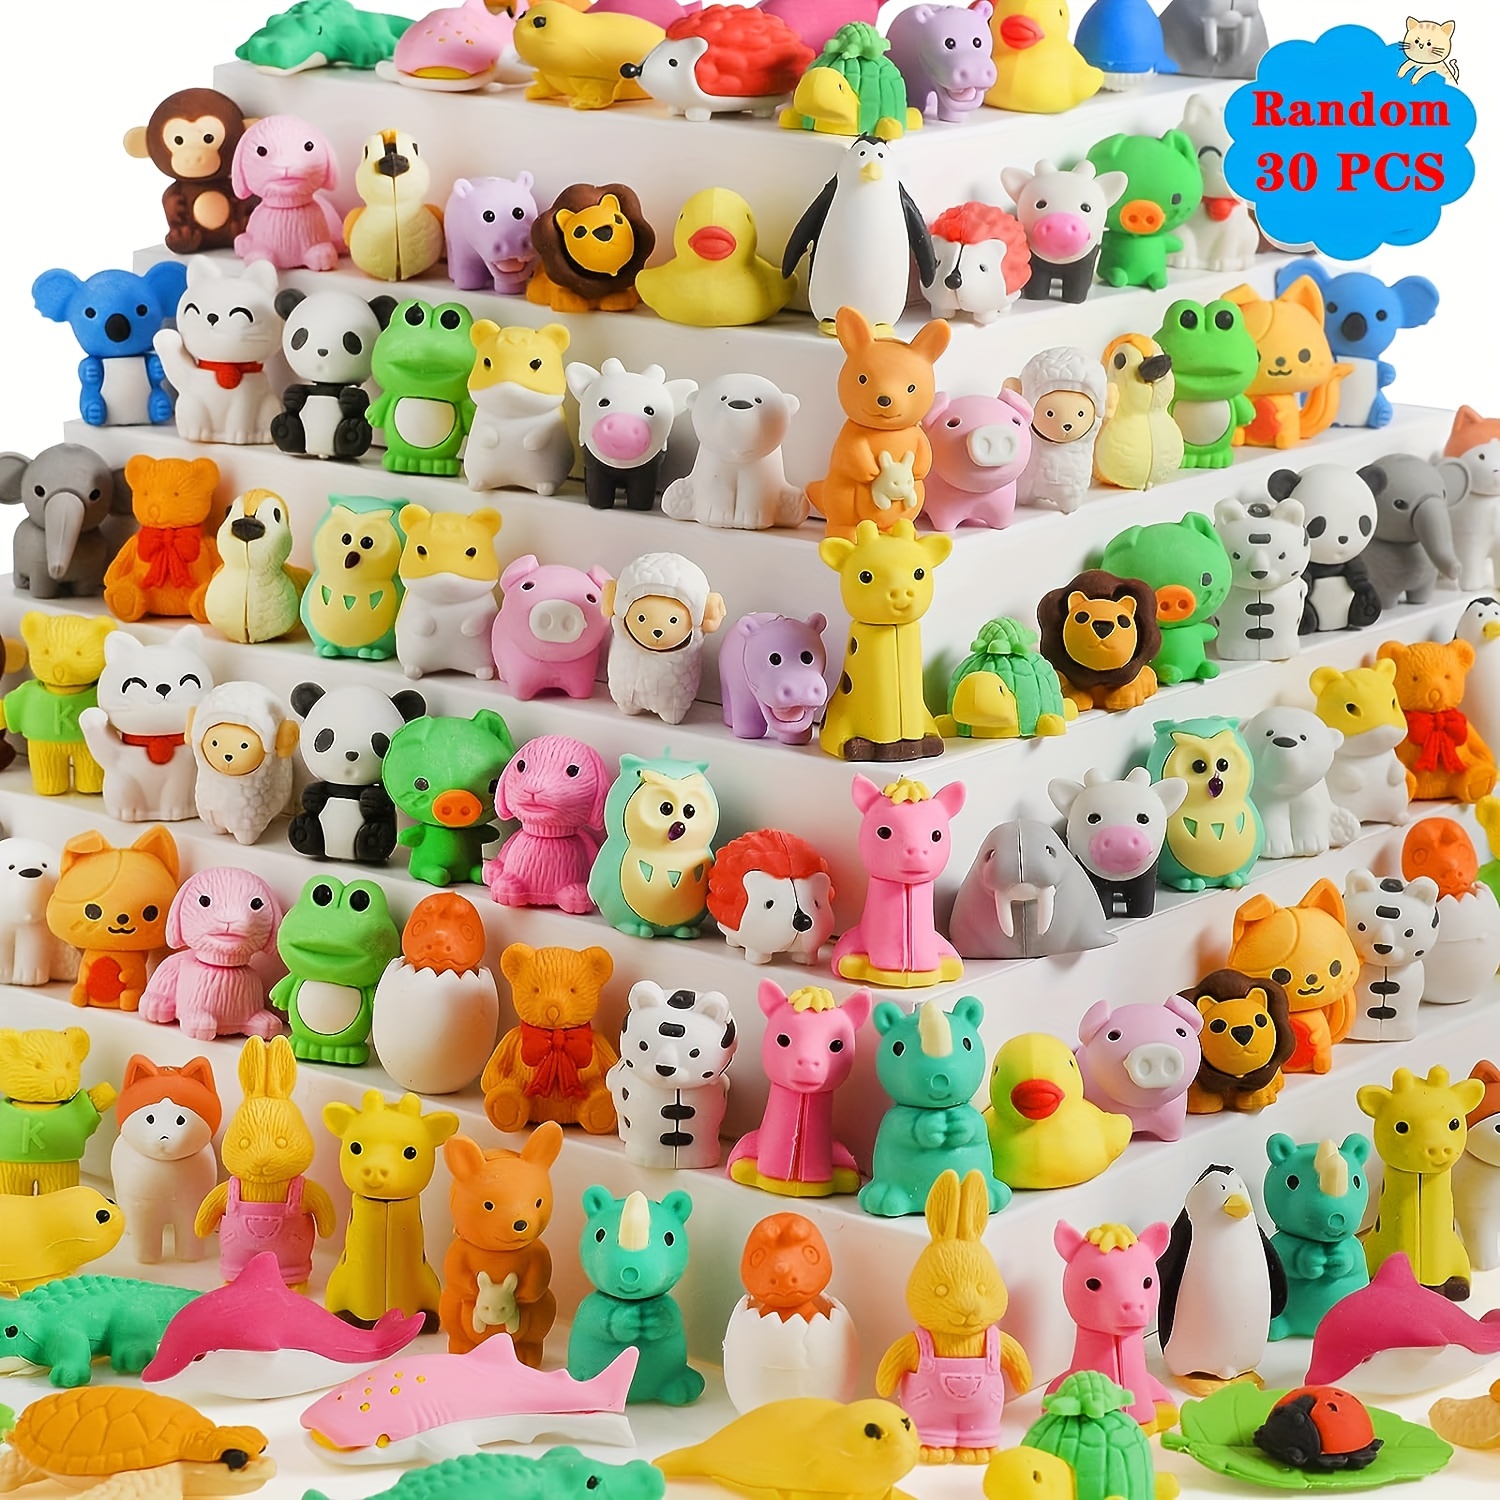 

30pcs Random Animal Erasers For Students, Cute Desk Pets For Classroom, Cool 3d Puzzle Mini Erasers Bulk, Fun Back To School Gifts Supplies, Classroom Rewards Prizes, Treasure Box Toys For Students